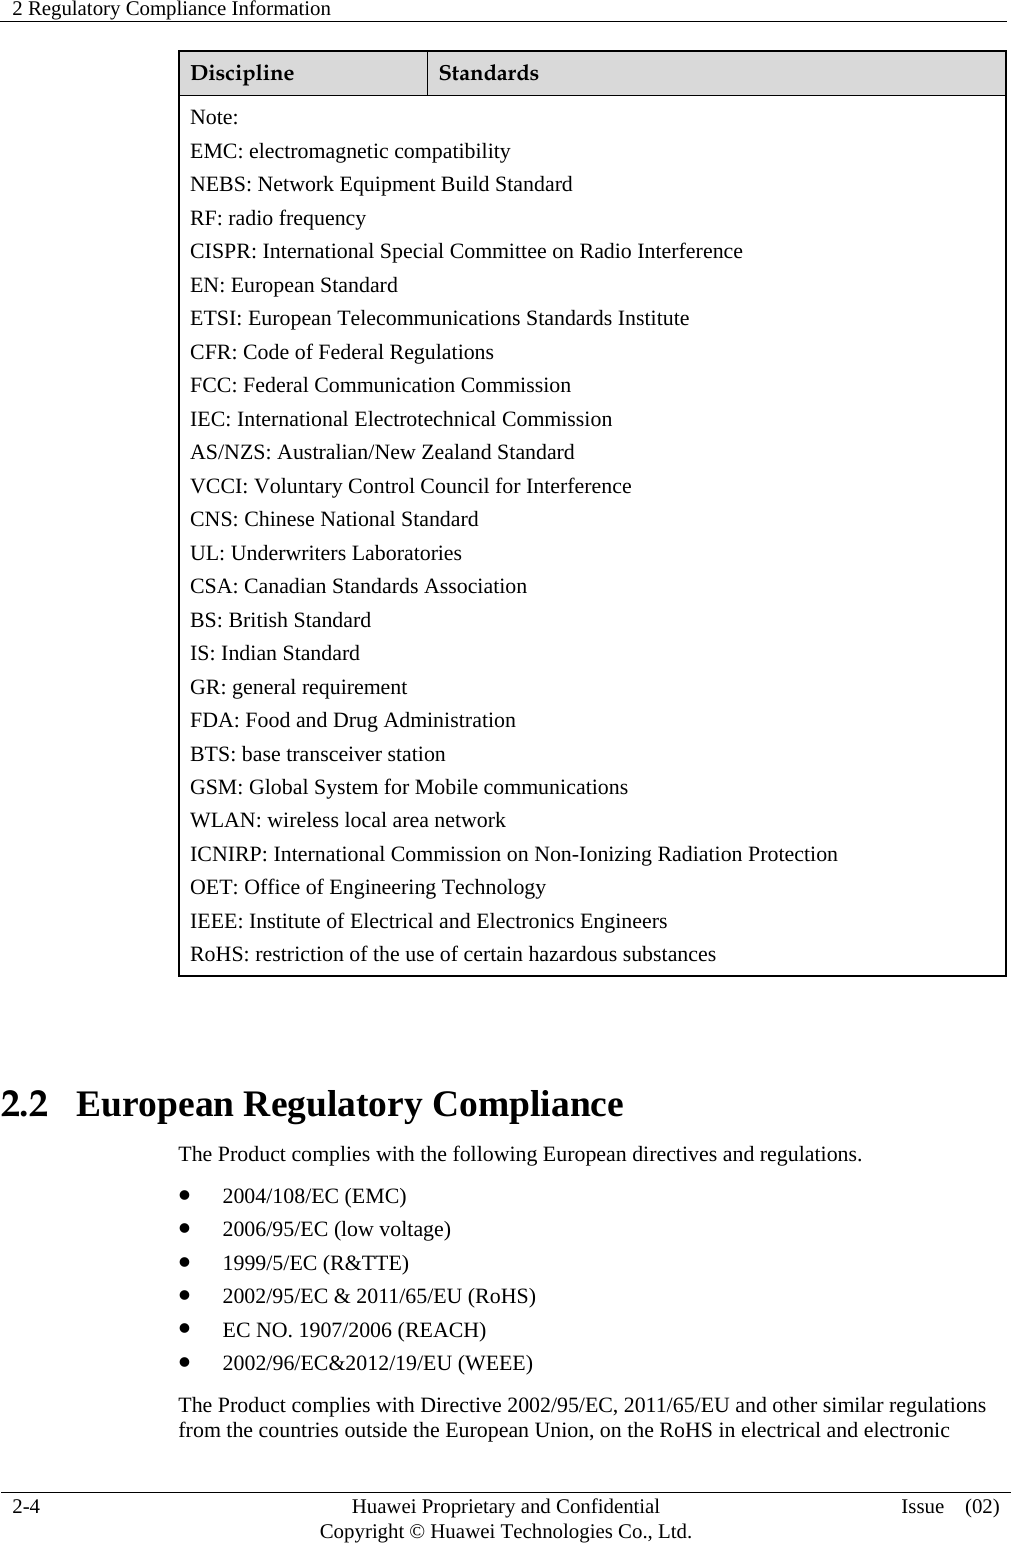 2 Regulatory Compliance Information     2-4  Huawei Proprietary and Confidential         Copyright © Huawei Technologies Co., Ltd.  Issue  (02)  Discipline  Standards Note: EMC: electromagnetic compatibility NEBS: Network Equipment Build Standard RF: radio frequency CISPR: International Special Committee on Radio Interference EN: European Standard ETSI: European Telecommunications Standards Institute CFR: Code of Federal Regulations FCC: Federal Communication Commission IEC: International Electrotechnical Commission AS/NZS: Australian/New Zealand Standard VCCI: Voluntary Control Council for Interference CNS: Chinese National Standard UL: Underwriters Laboratories CSA: Canadian Standards Association BS: British Standard IS: Indian Standard GR: general requirement FDA: Food and Drug Administration BTS: base transceiver station GSM: Global System for Mobile communications WLAN: wireless local area network ICNIRP: International Commission on Non-Ionizing Radiation Protection OET: Office of Engineering Technology IEEE: Institute of Electrical and Electronics Engineers RoHS: restriction of the use of certain hazardous substances  2.2   European Regulatory Compliance The Product complies with the following European directives and regulations.  2004/108/EC (EMC)  2006/95/EC (low voltage)  1999/5/EC (R&amp;TTE)  2002/95/EC &amp; 2011/65/EU (RoHS)  EC NO. 1907/2006 (REACH)  2002/96/EC&amp;2012/19/EU (WEEE) The Product complies with Directive 2002/95/EC, 2011/65/EU and other similar regulations from the countries outside the European Union, on the RoHS in electrical and electronic 